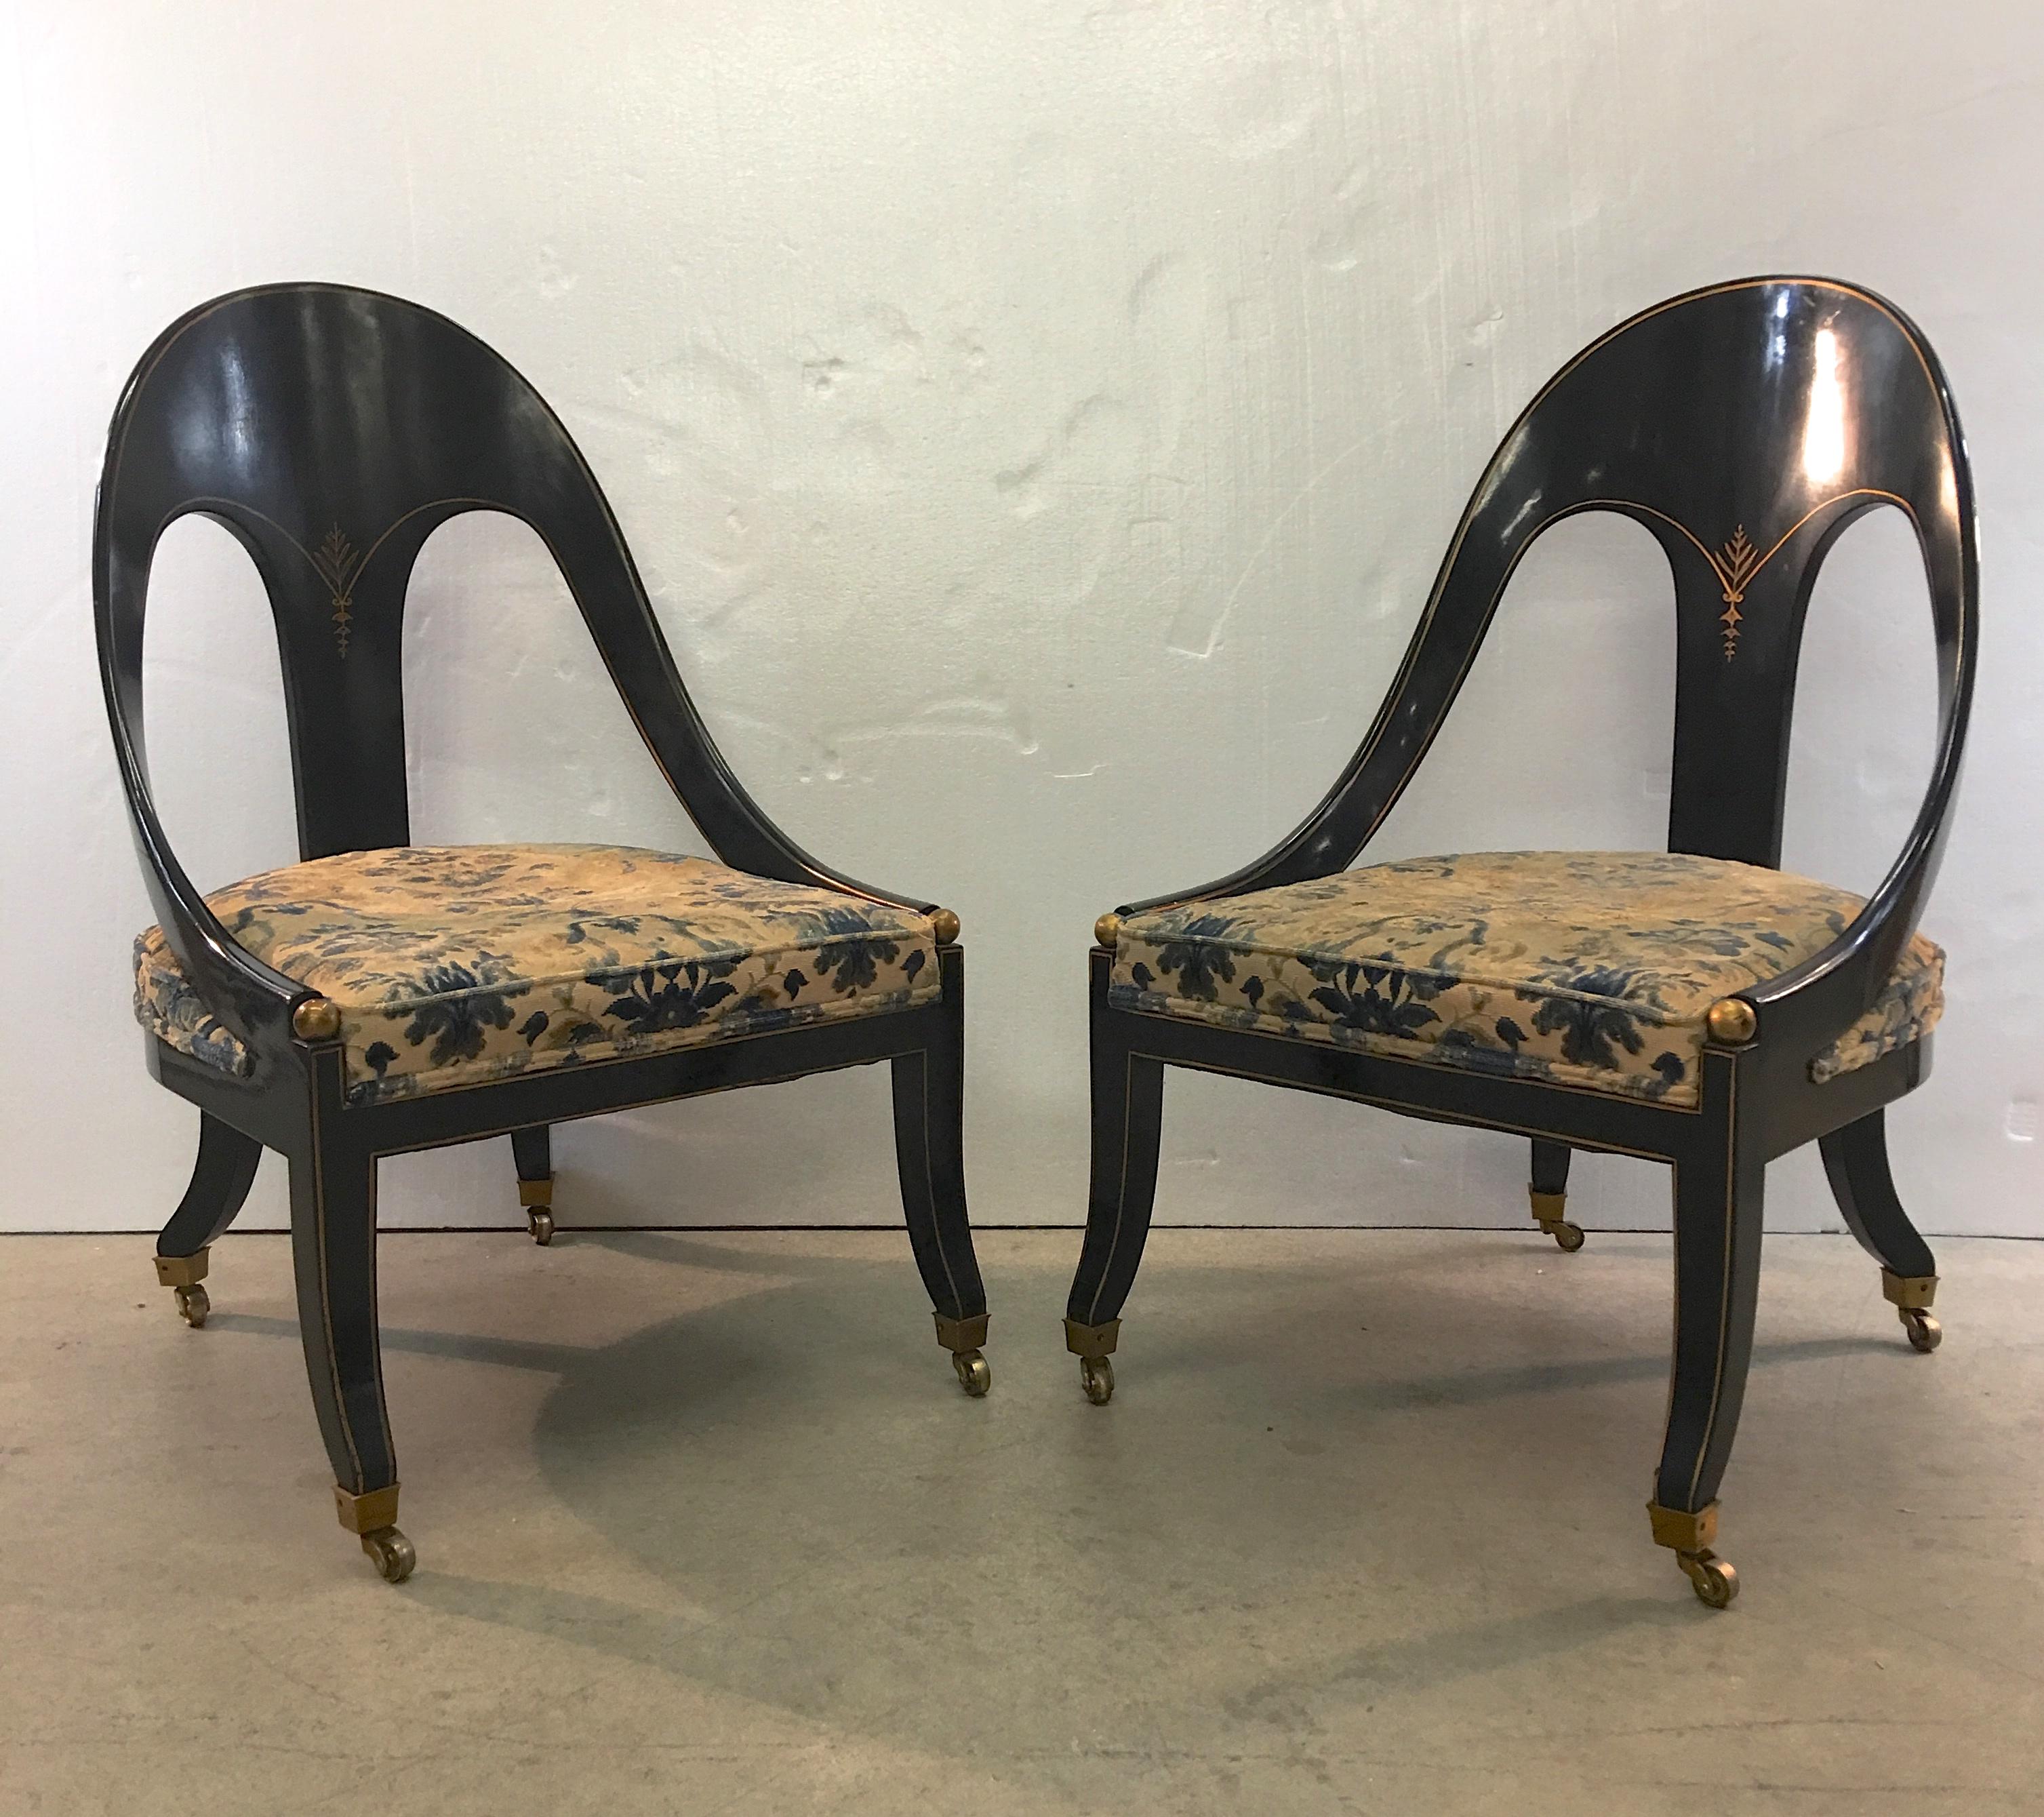 British Pair of English Classical Spoon Back Chairs